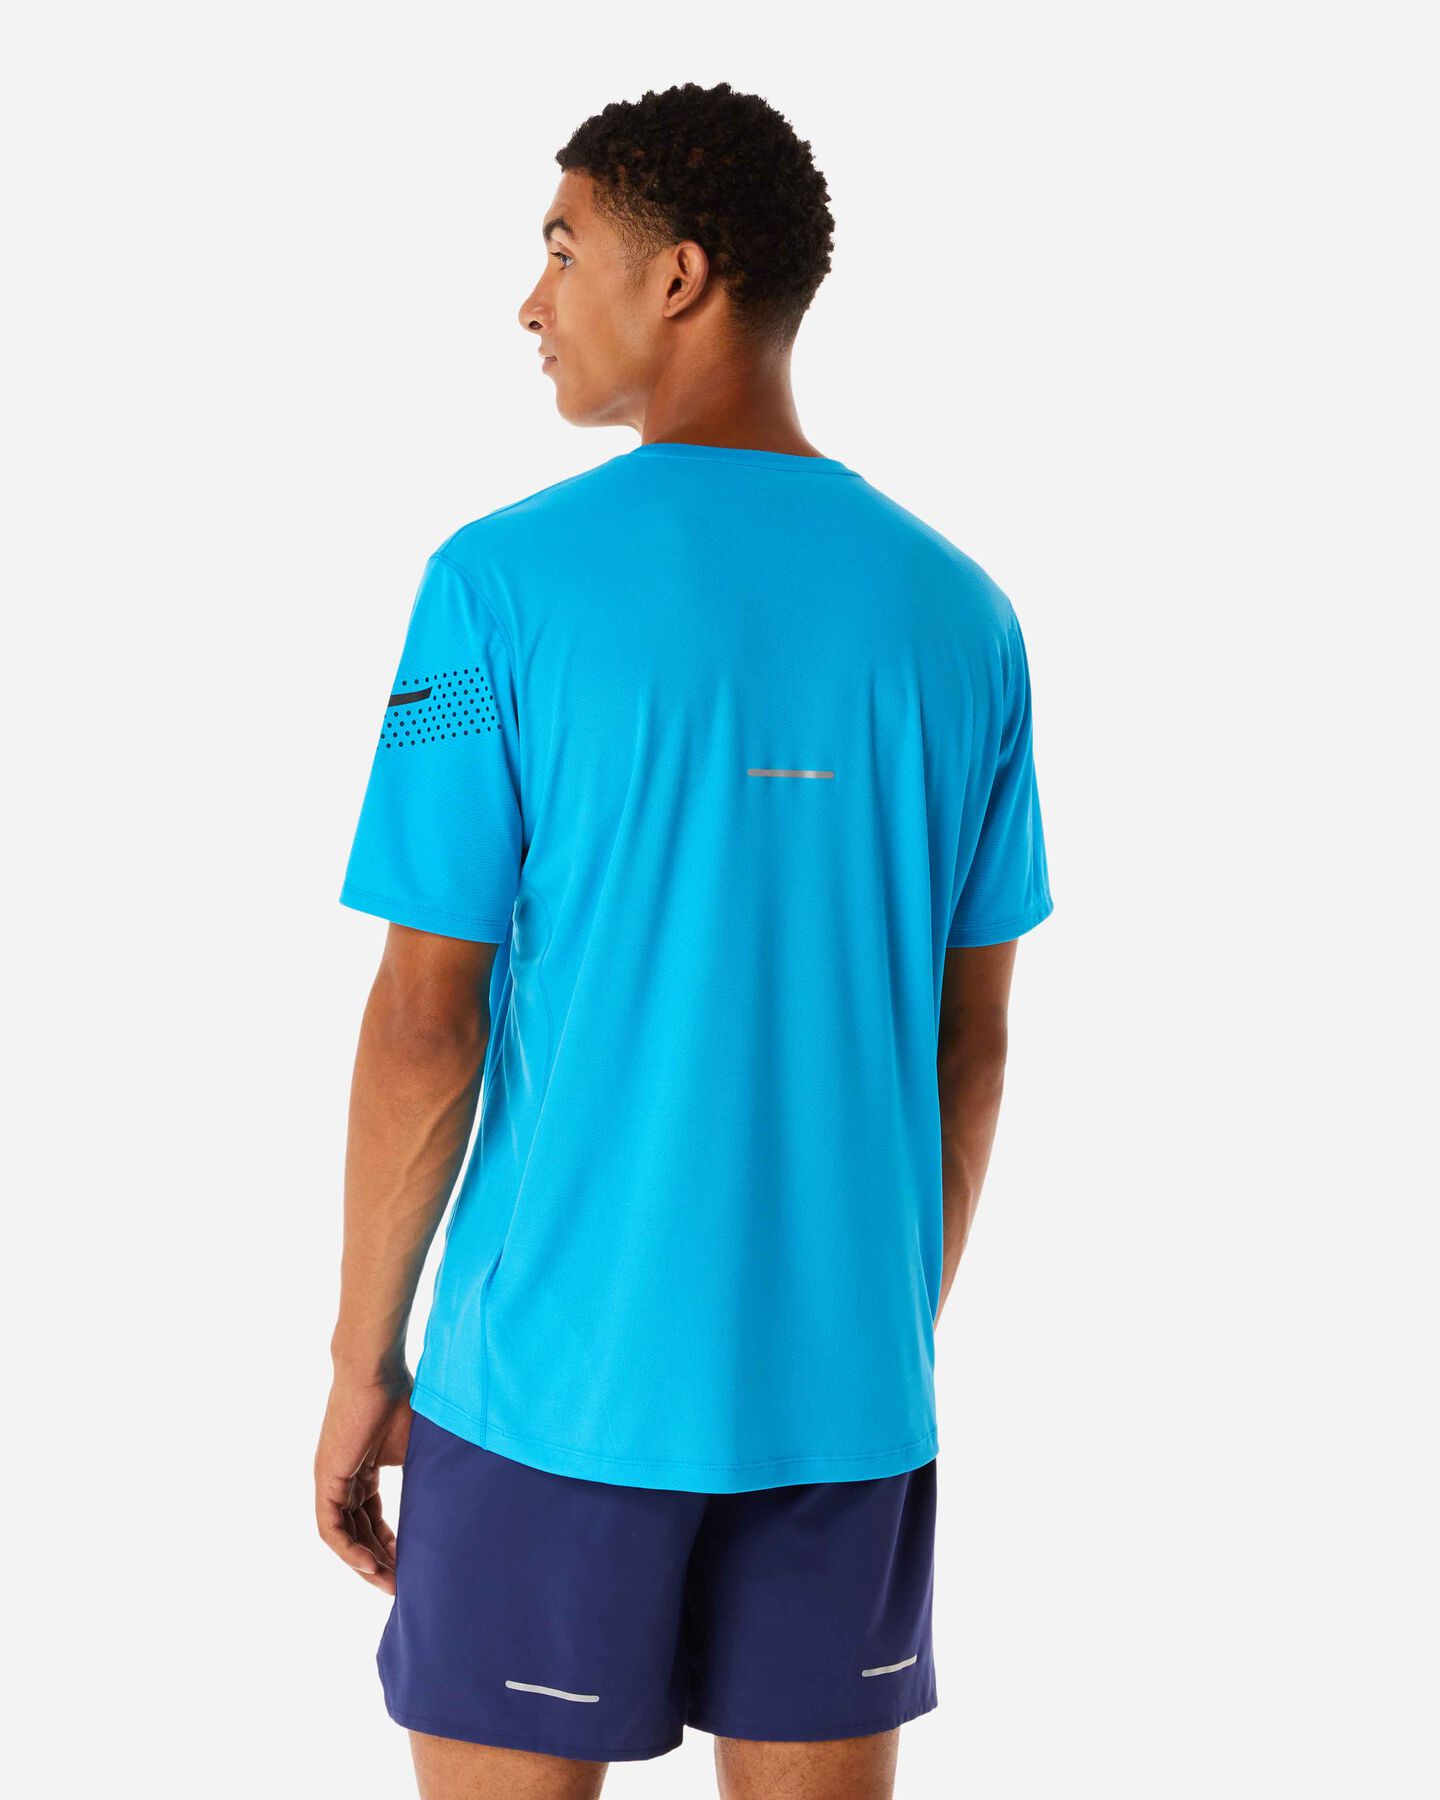  T-Shirt running ASICS ICON M S5526253|403|S scatto 2